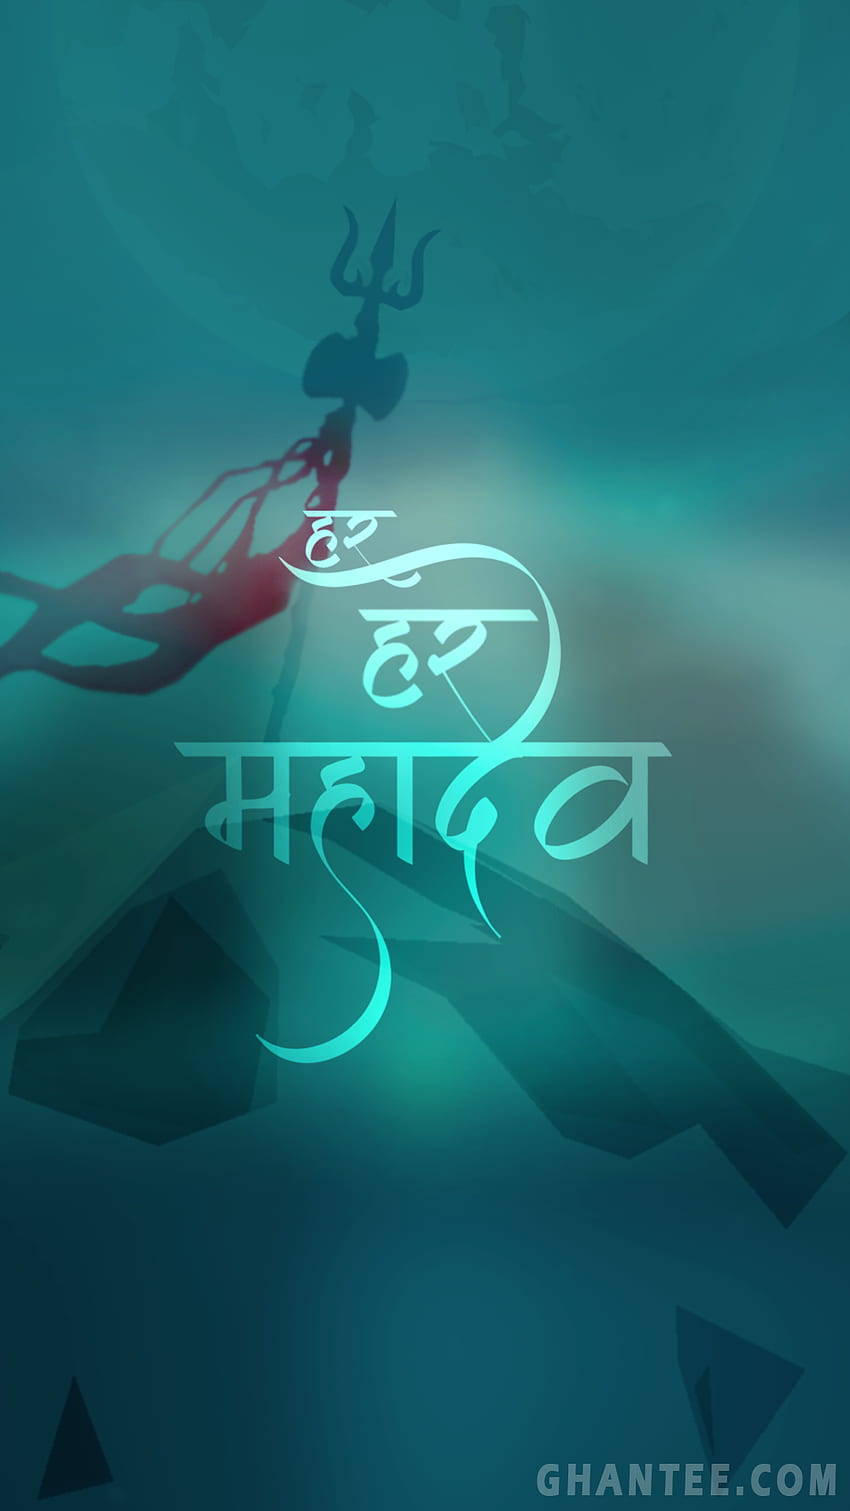 mahadev: ED seizes Rs 417 crore in connection with betting app Mahadev;  what we know about the case so far - The Economic Times